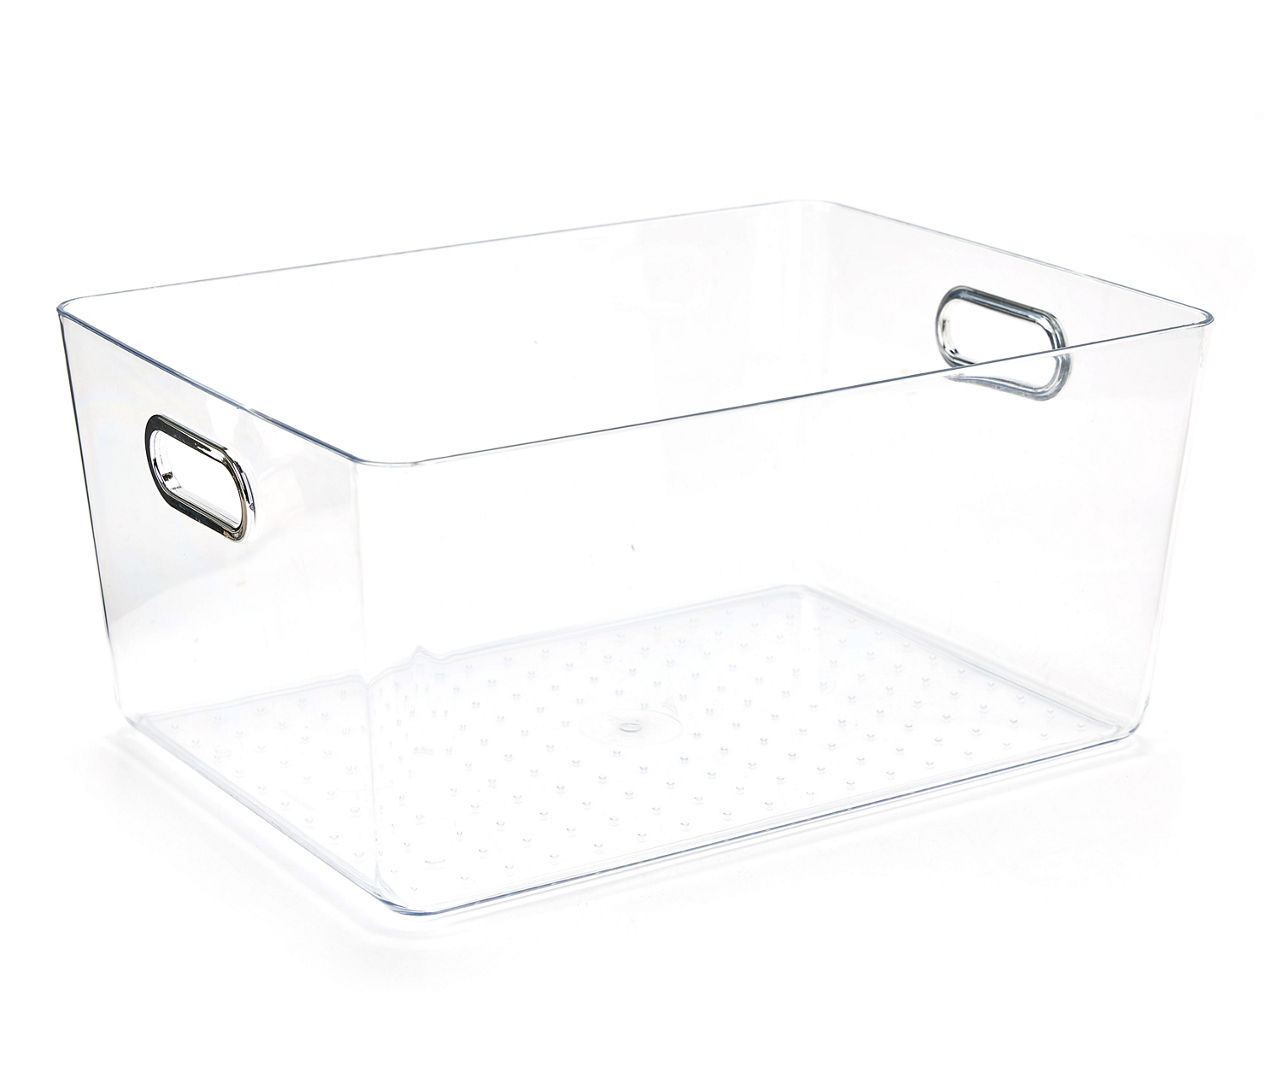 Euphoric Expression Clear Acrylic Storage Bin With Grommet Handles, (11.25")